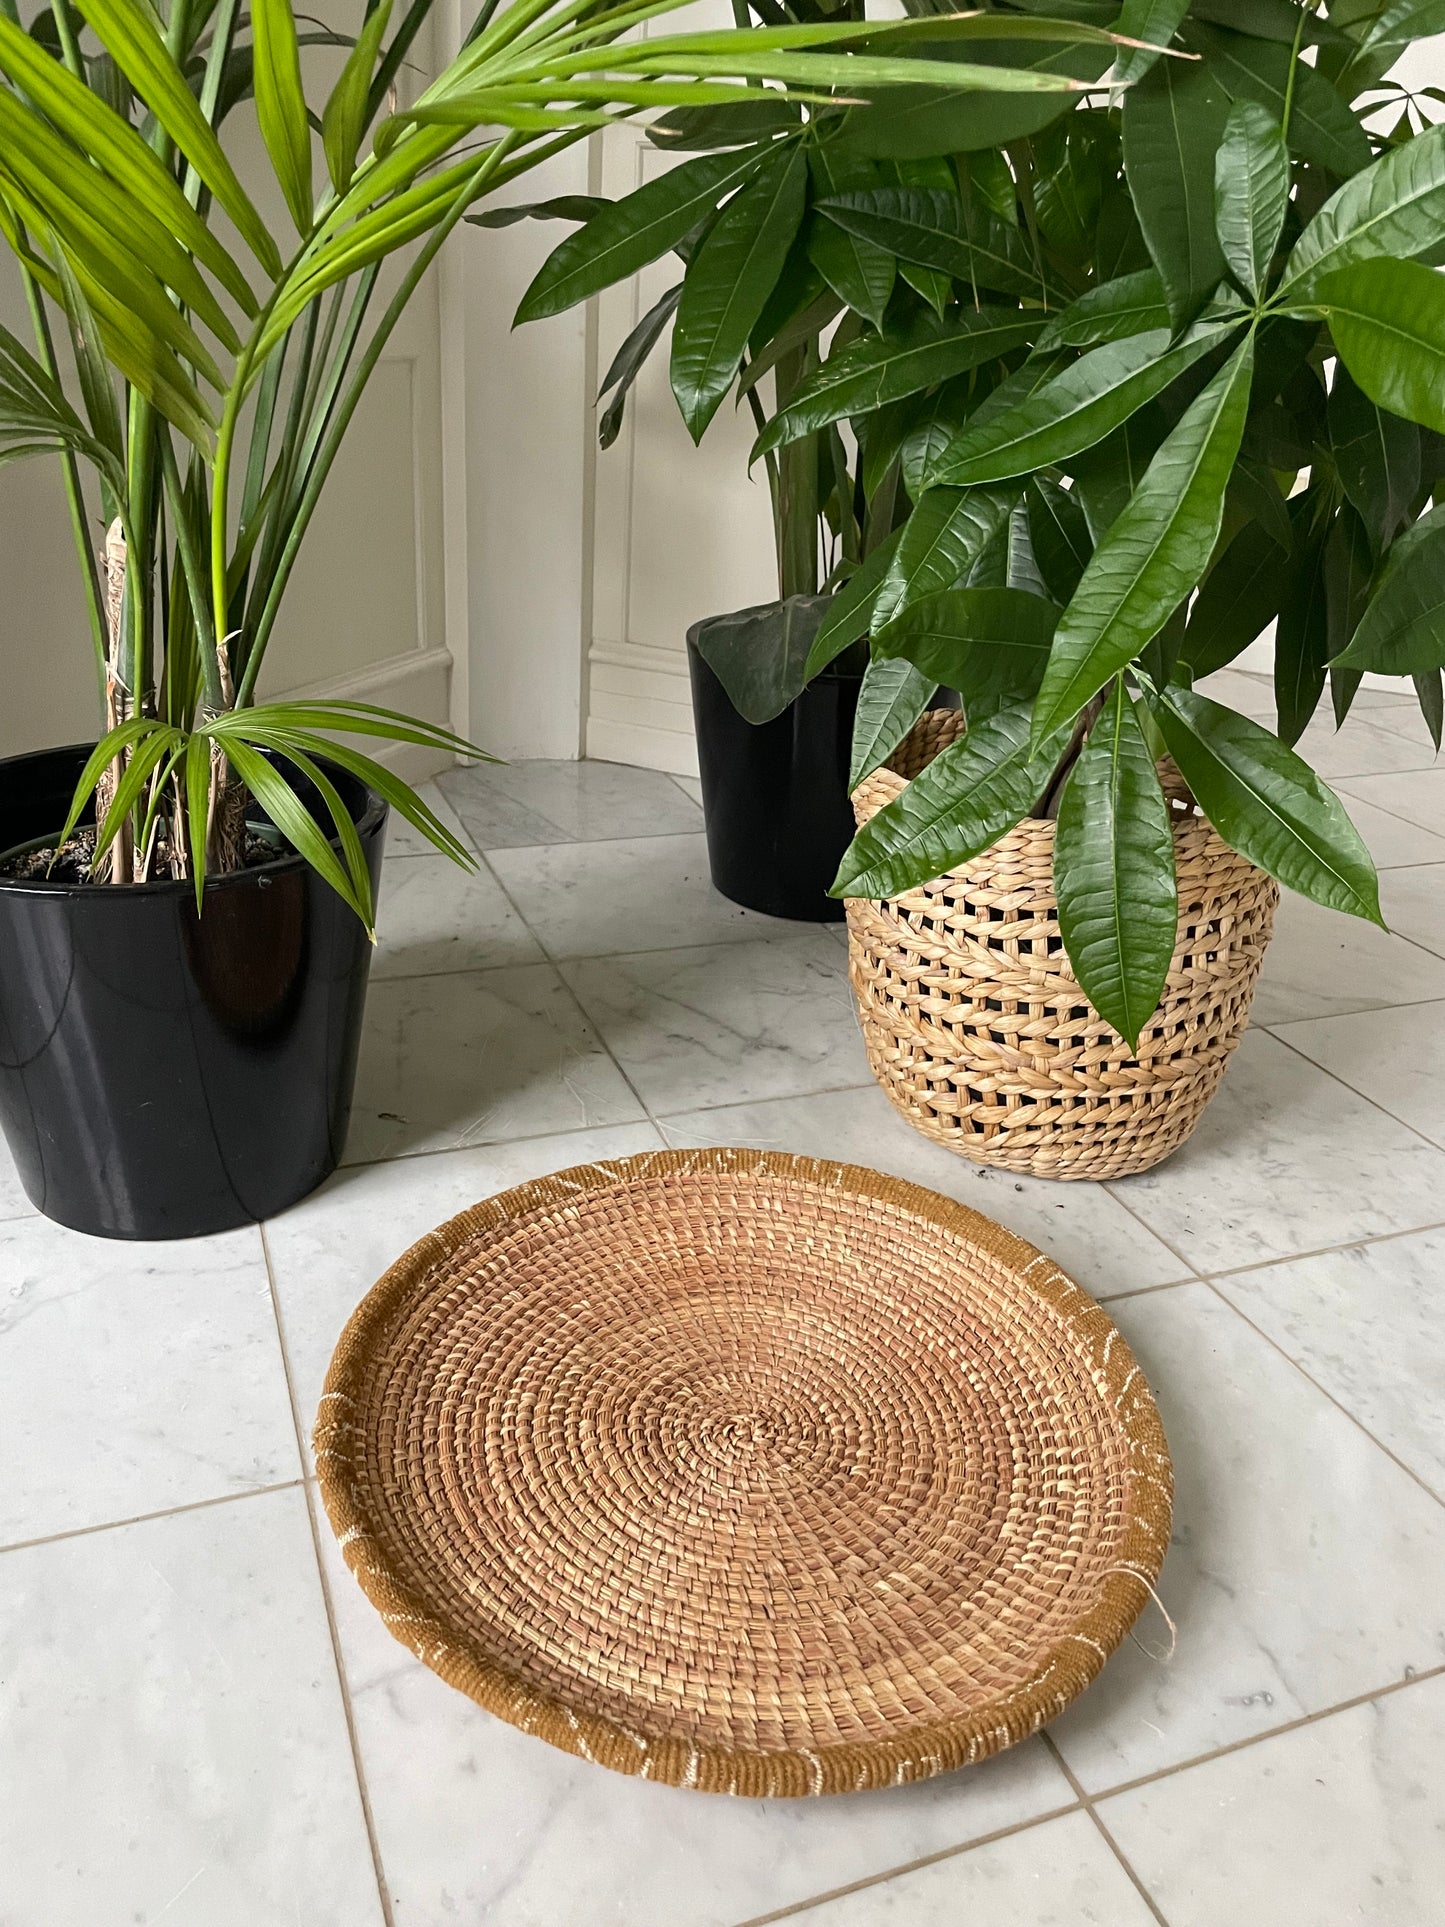 Wicker baskets for wall or table. Braided in elephant grass with leather or textile edging. Fair Trade from Senegal